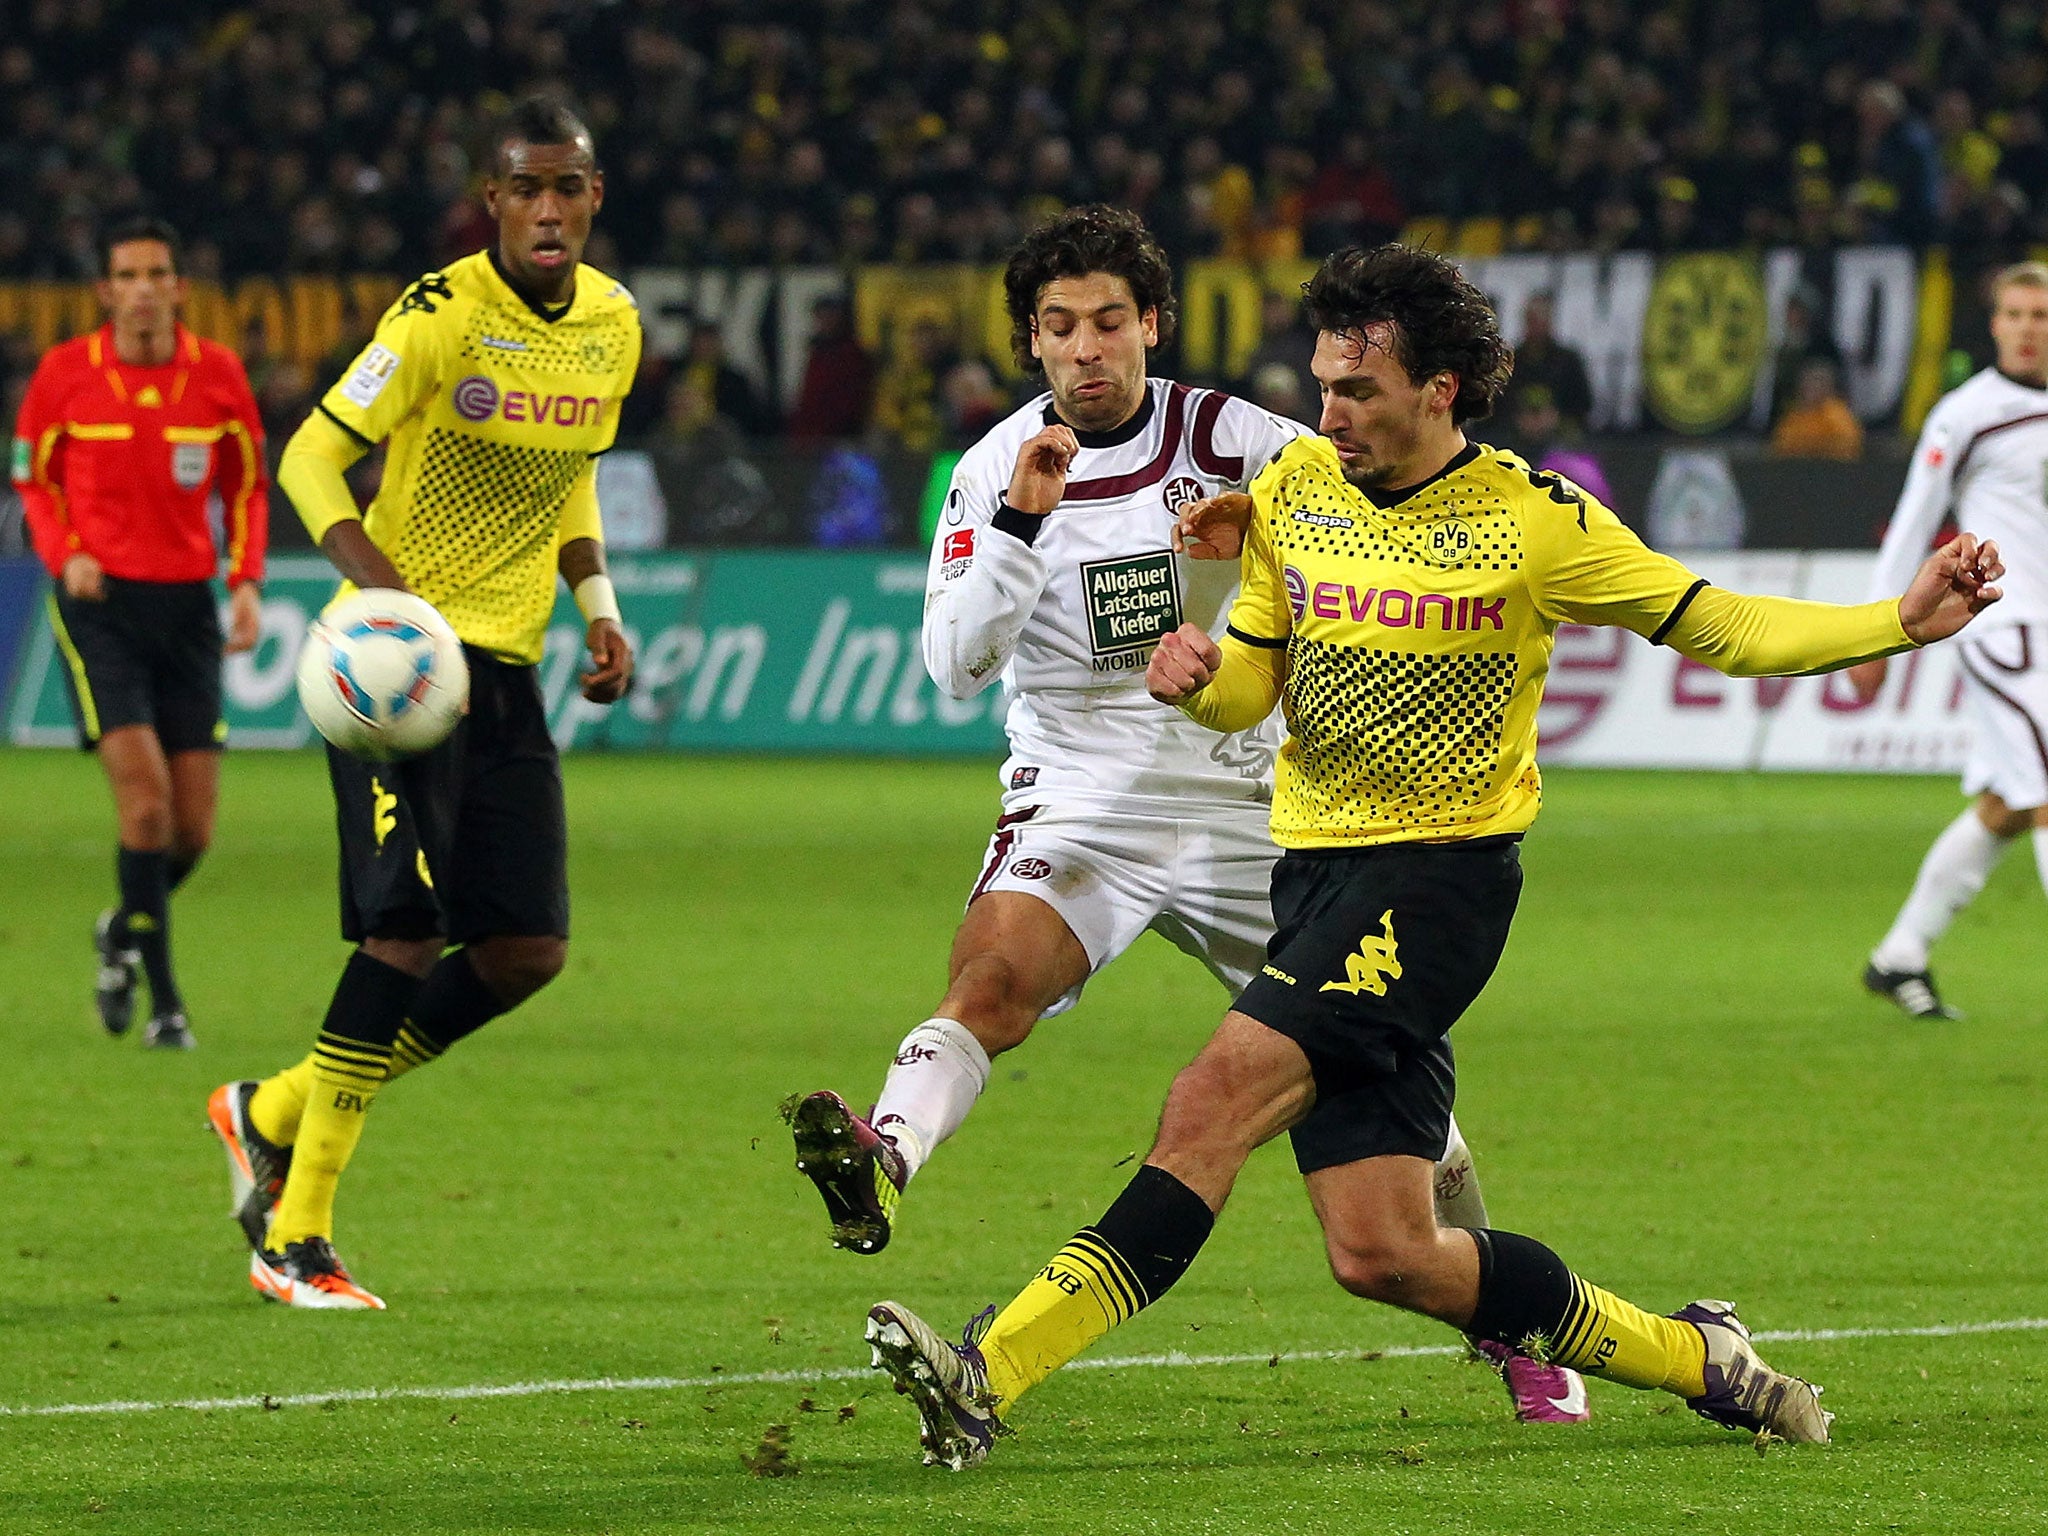 Hummels has grown to become one of the best defenders in the world at Borussia Dortmund